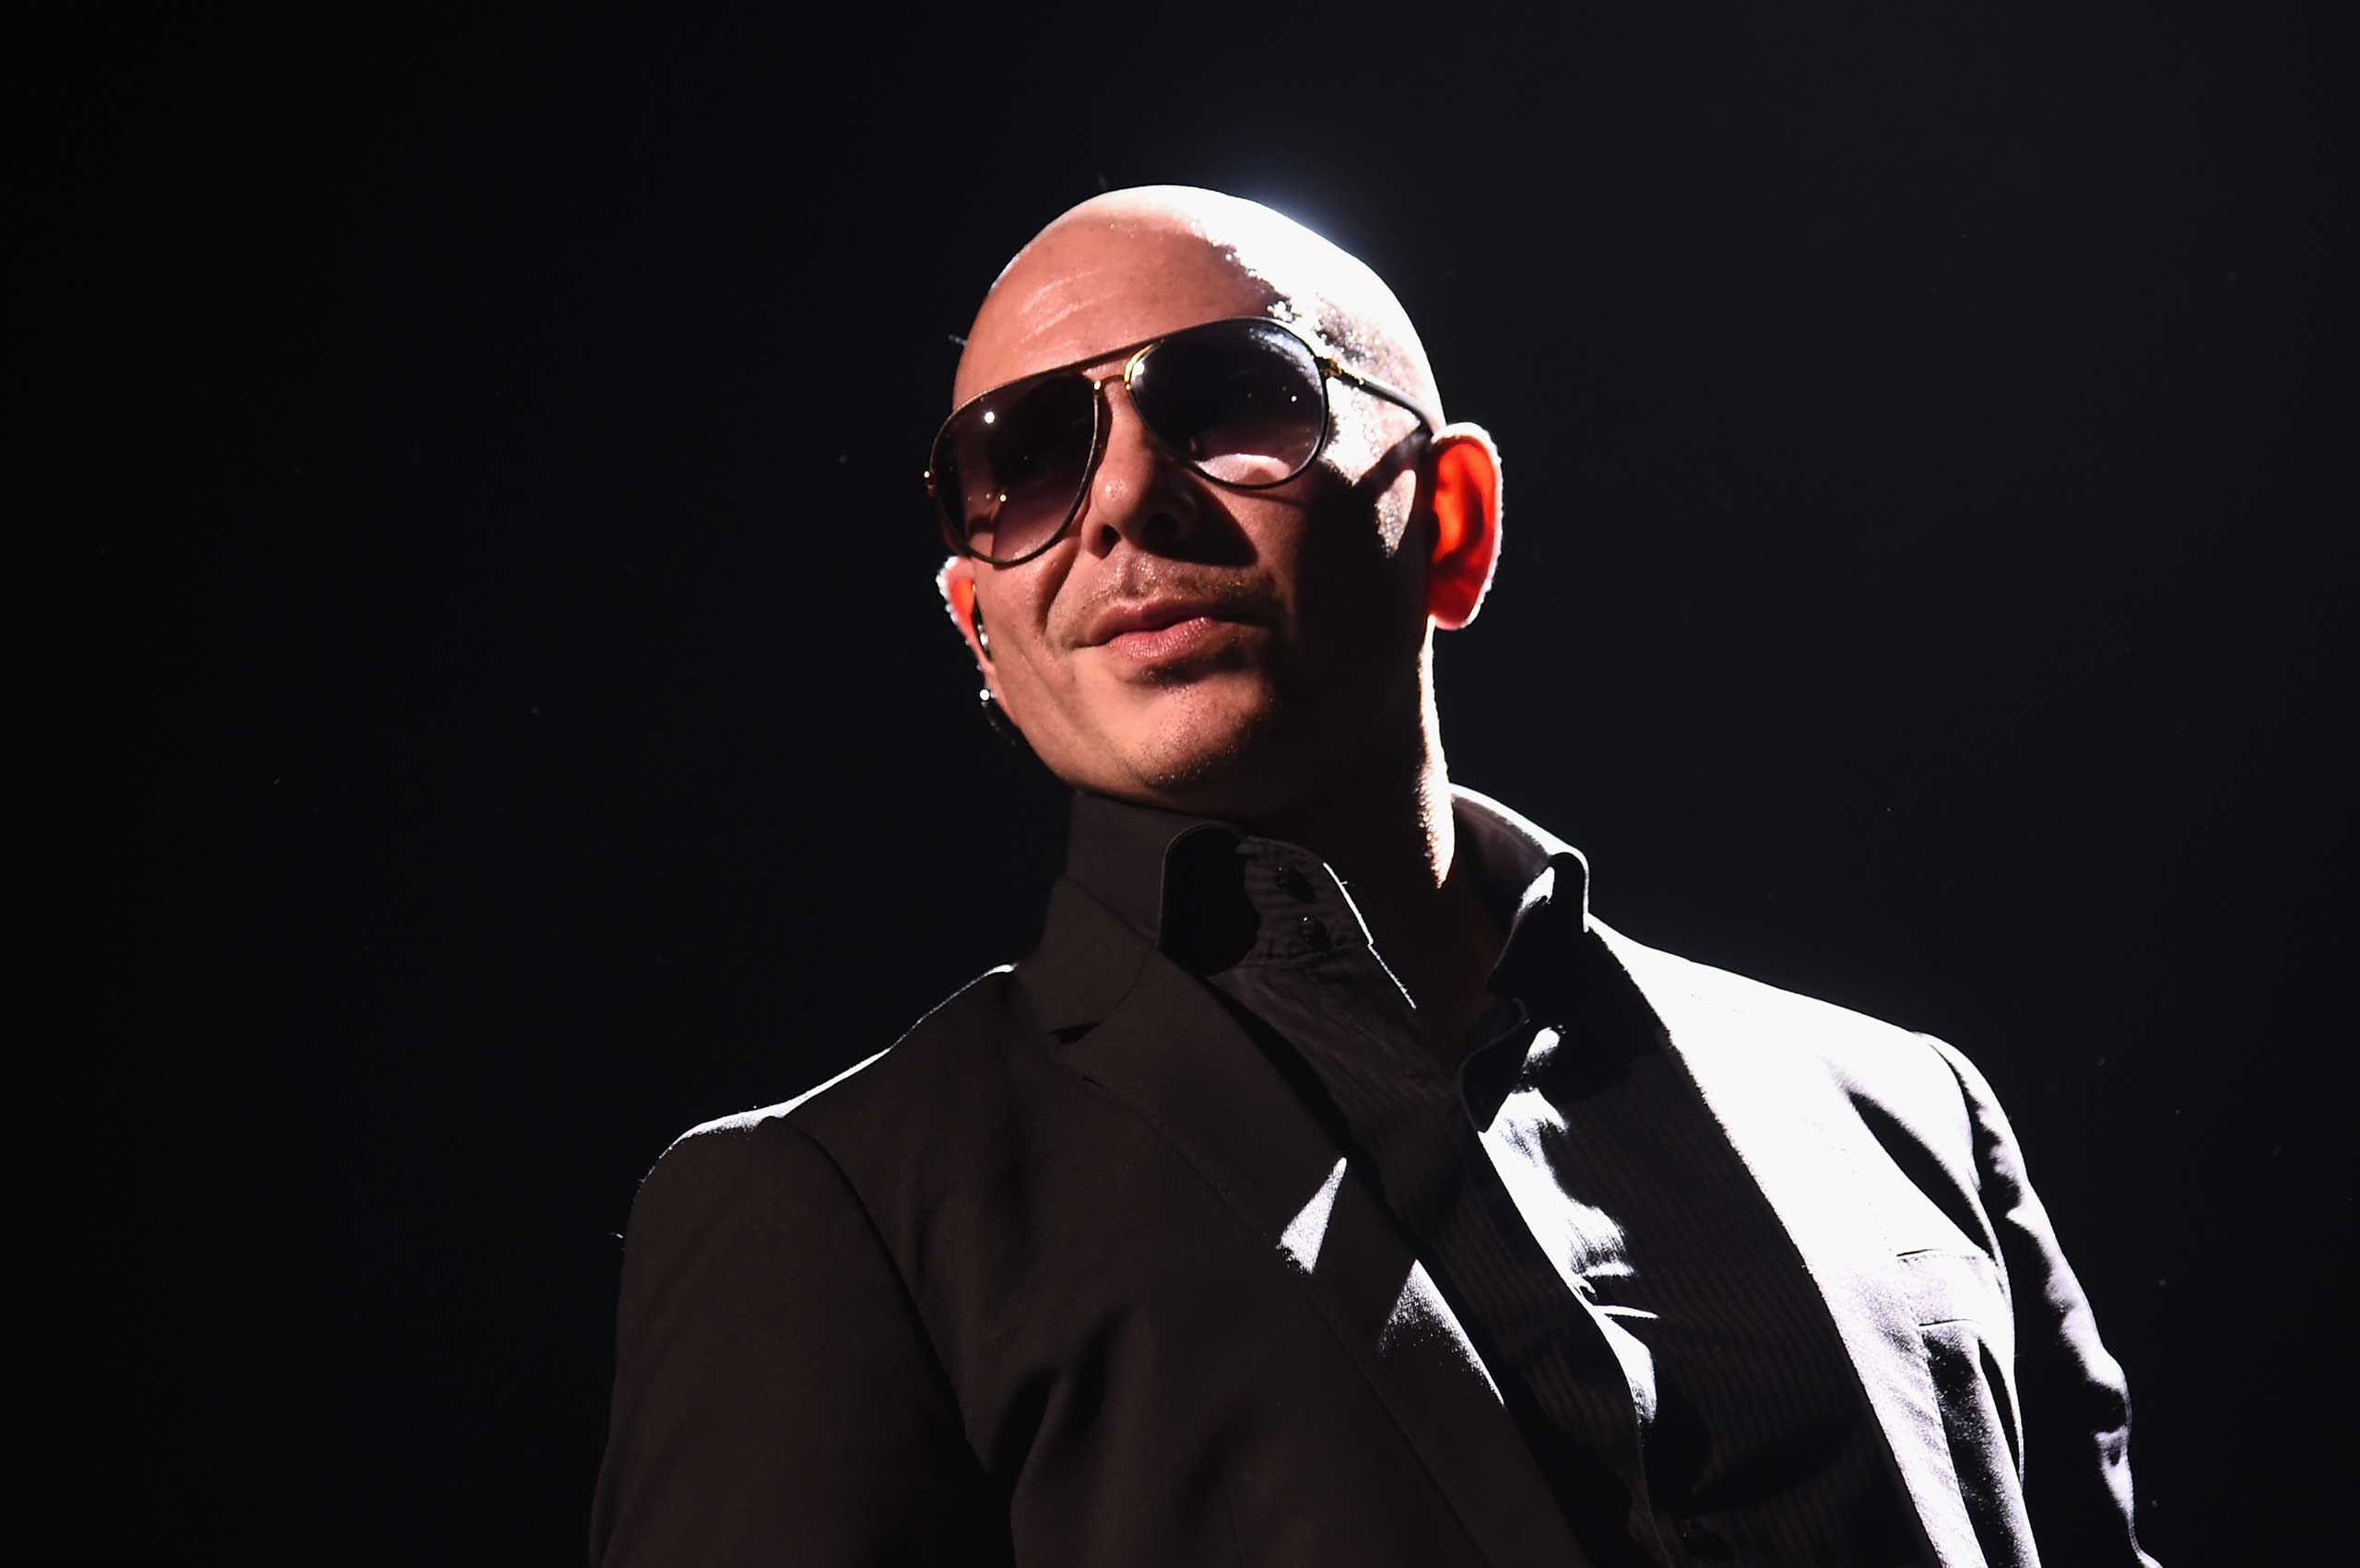 Artist Pitbull performs onstage in New York City, July 19, 2015. (Michael Loccisano—Getty Images)